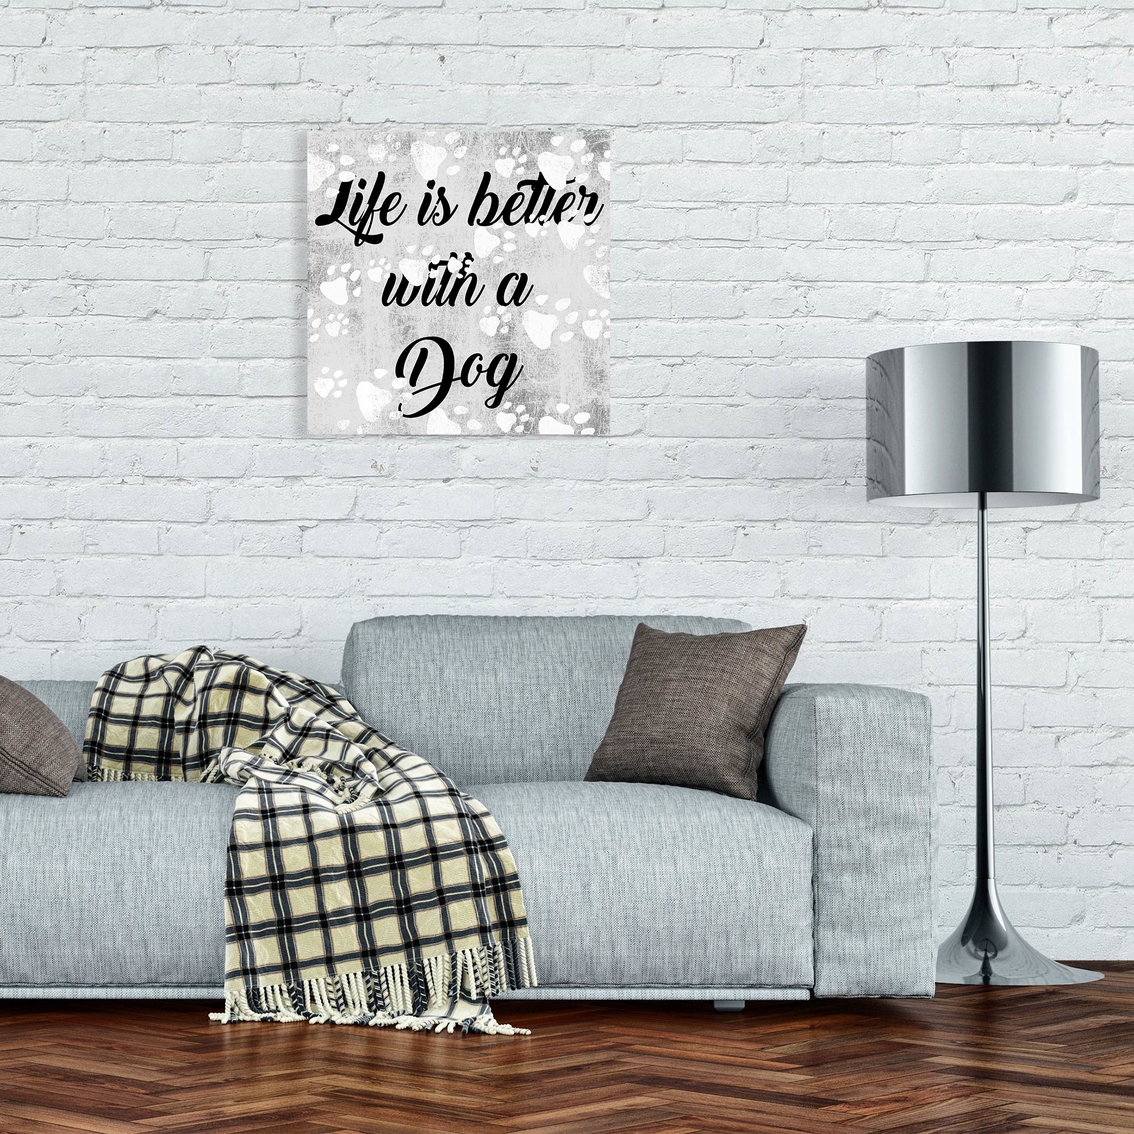 PTM Images Life is Better with a Dog Decorative Canvas Print Wall Art - Image 2 of 2